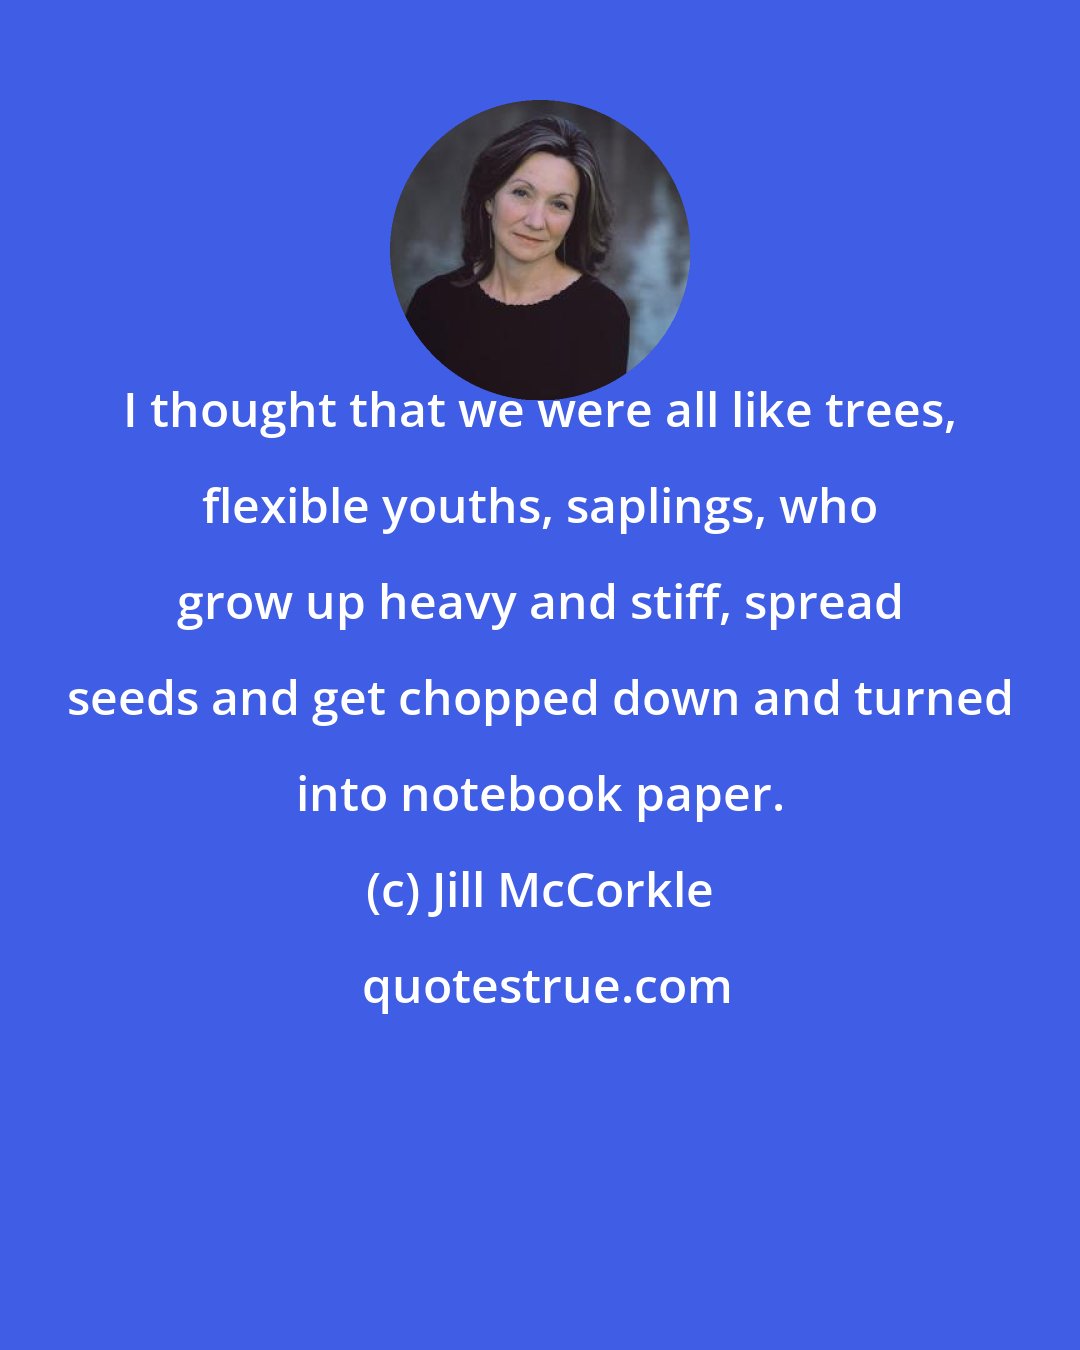 Jill McCorkle: I thought that we were all like trees, flexible youths, saplings, who grow up heavy and stiff, spread seeds and get chopped down and turned into notebook paper.